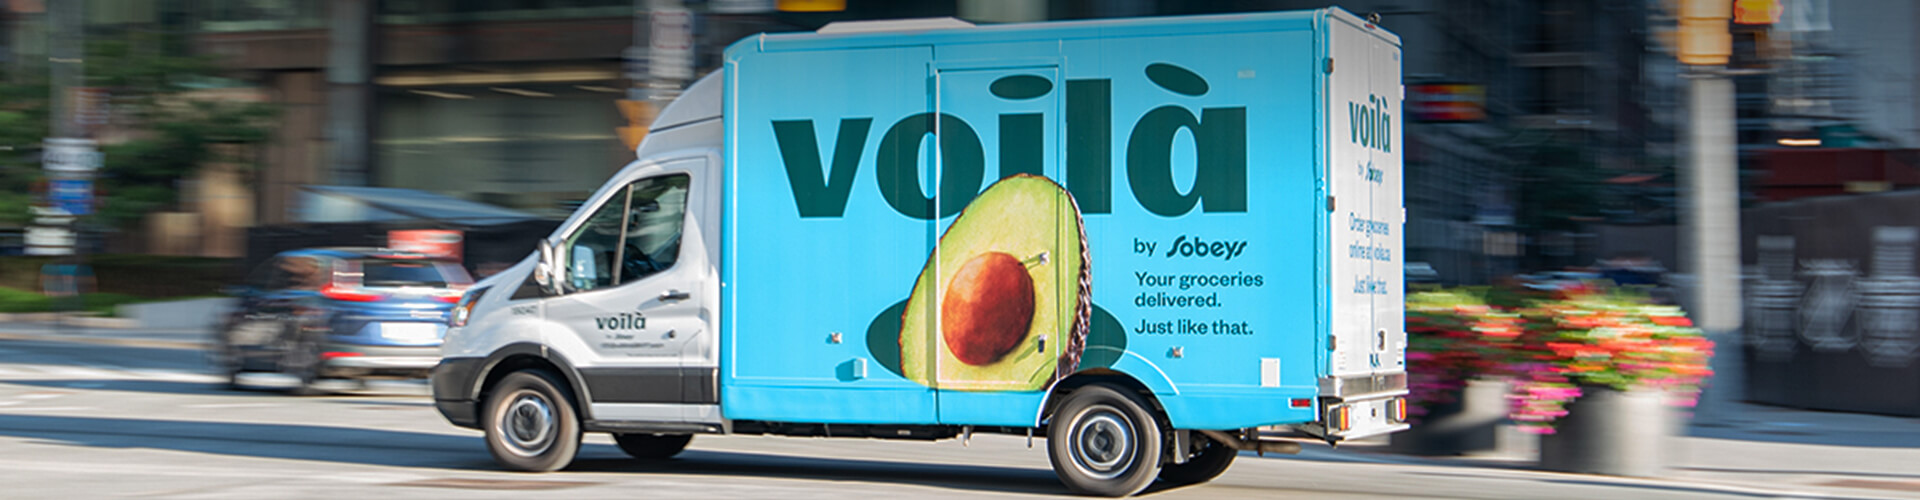 Picture of a delivery truck of Voila with the text written 'Voila by Sobeys. Your groceries delivered. Just like that.'